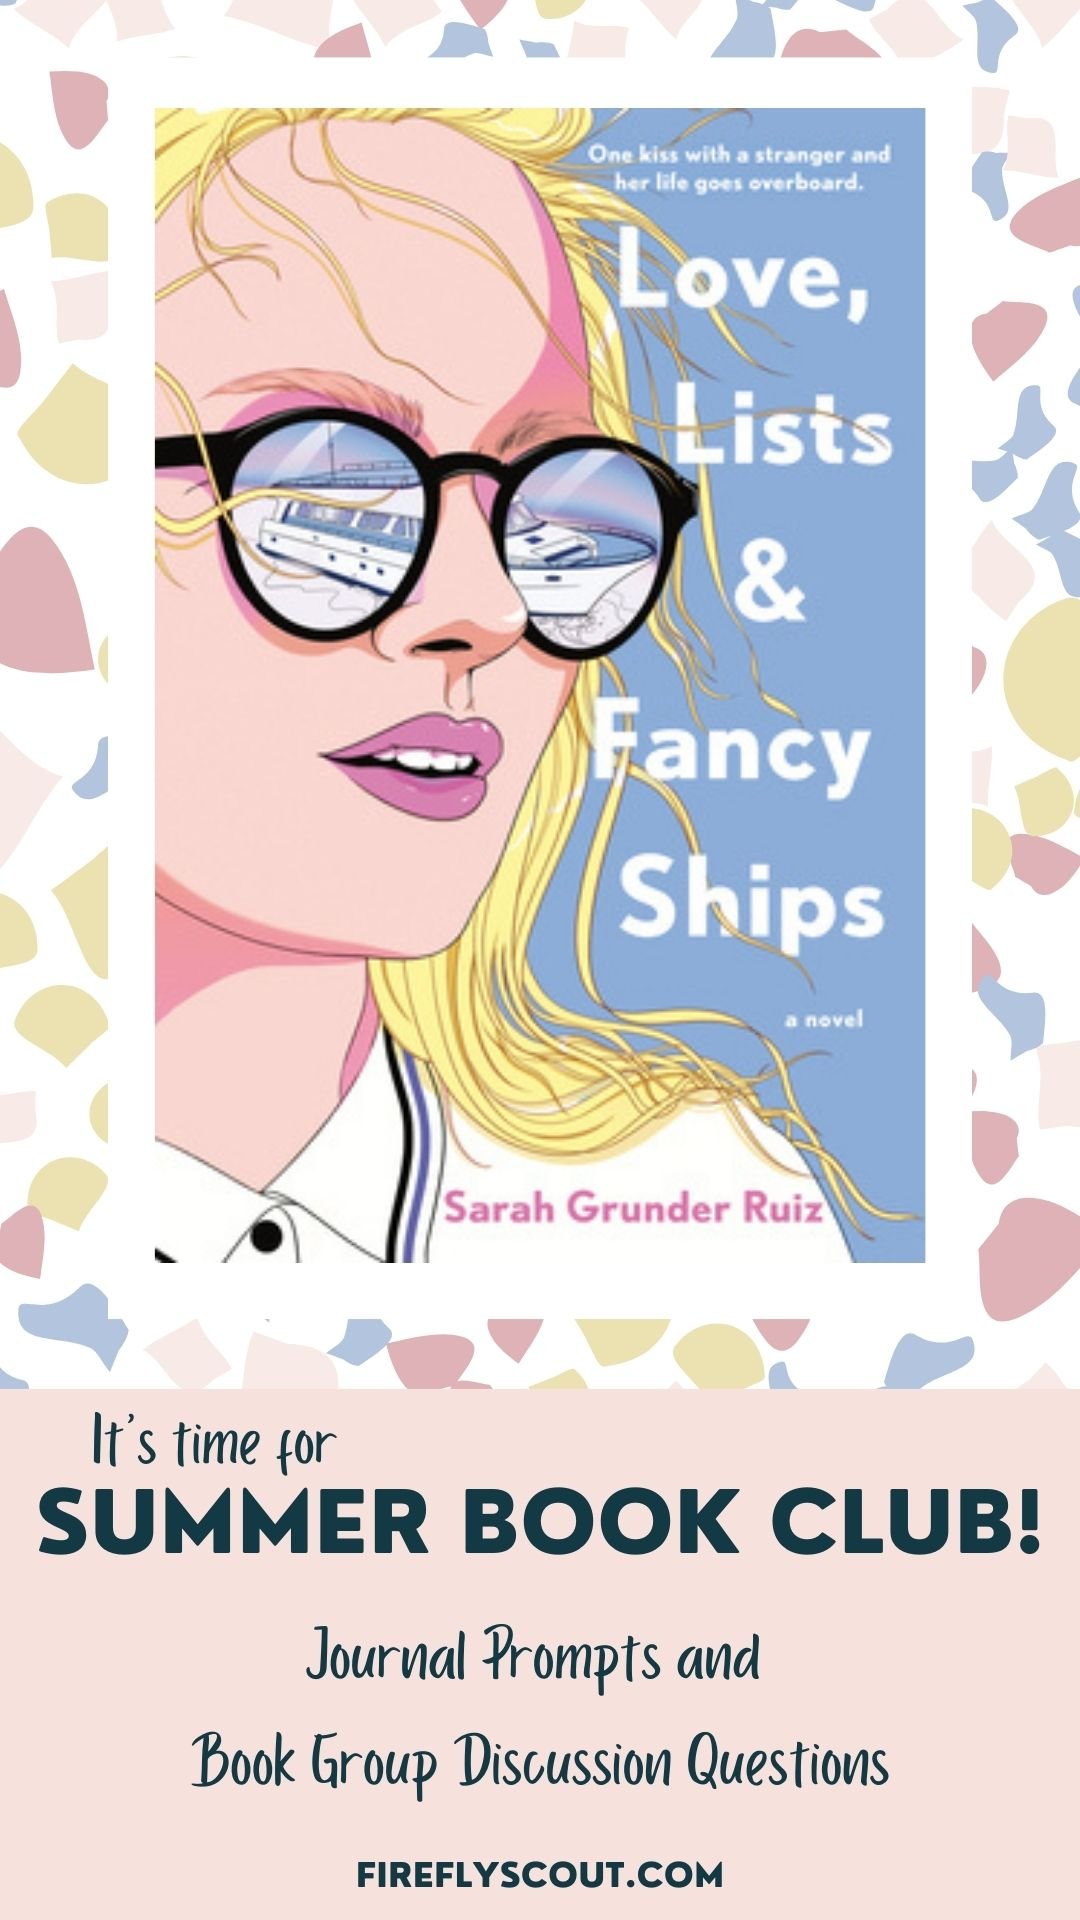 Love Lists and Fancy Ships by Sarah Grunder Ruiz